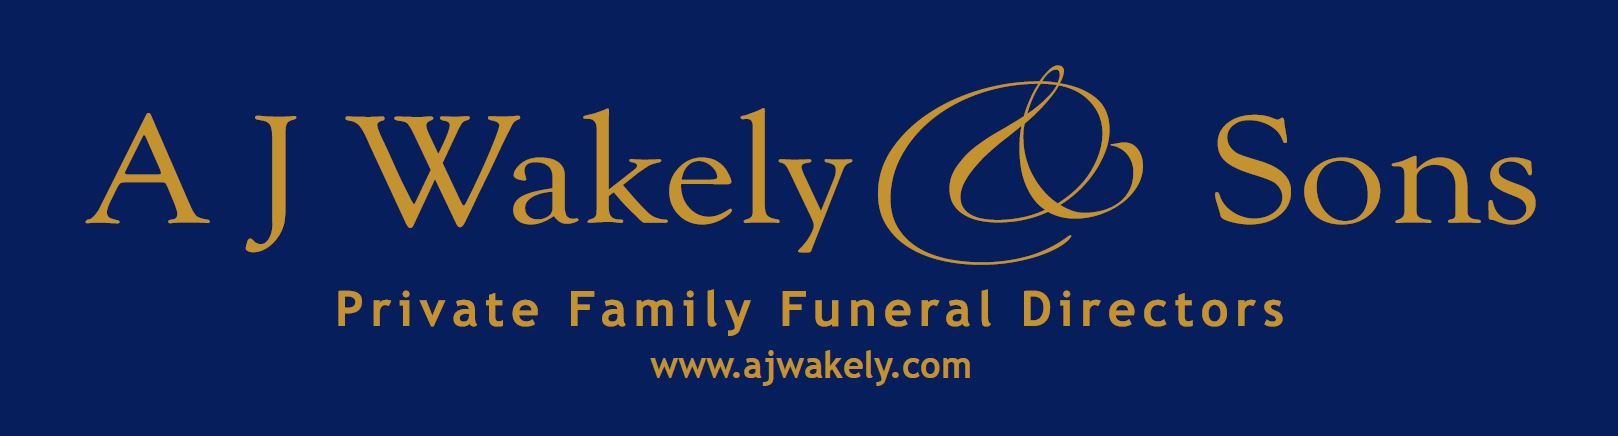 A J Wakely & Sons Logo